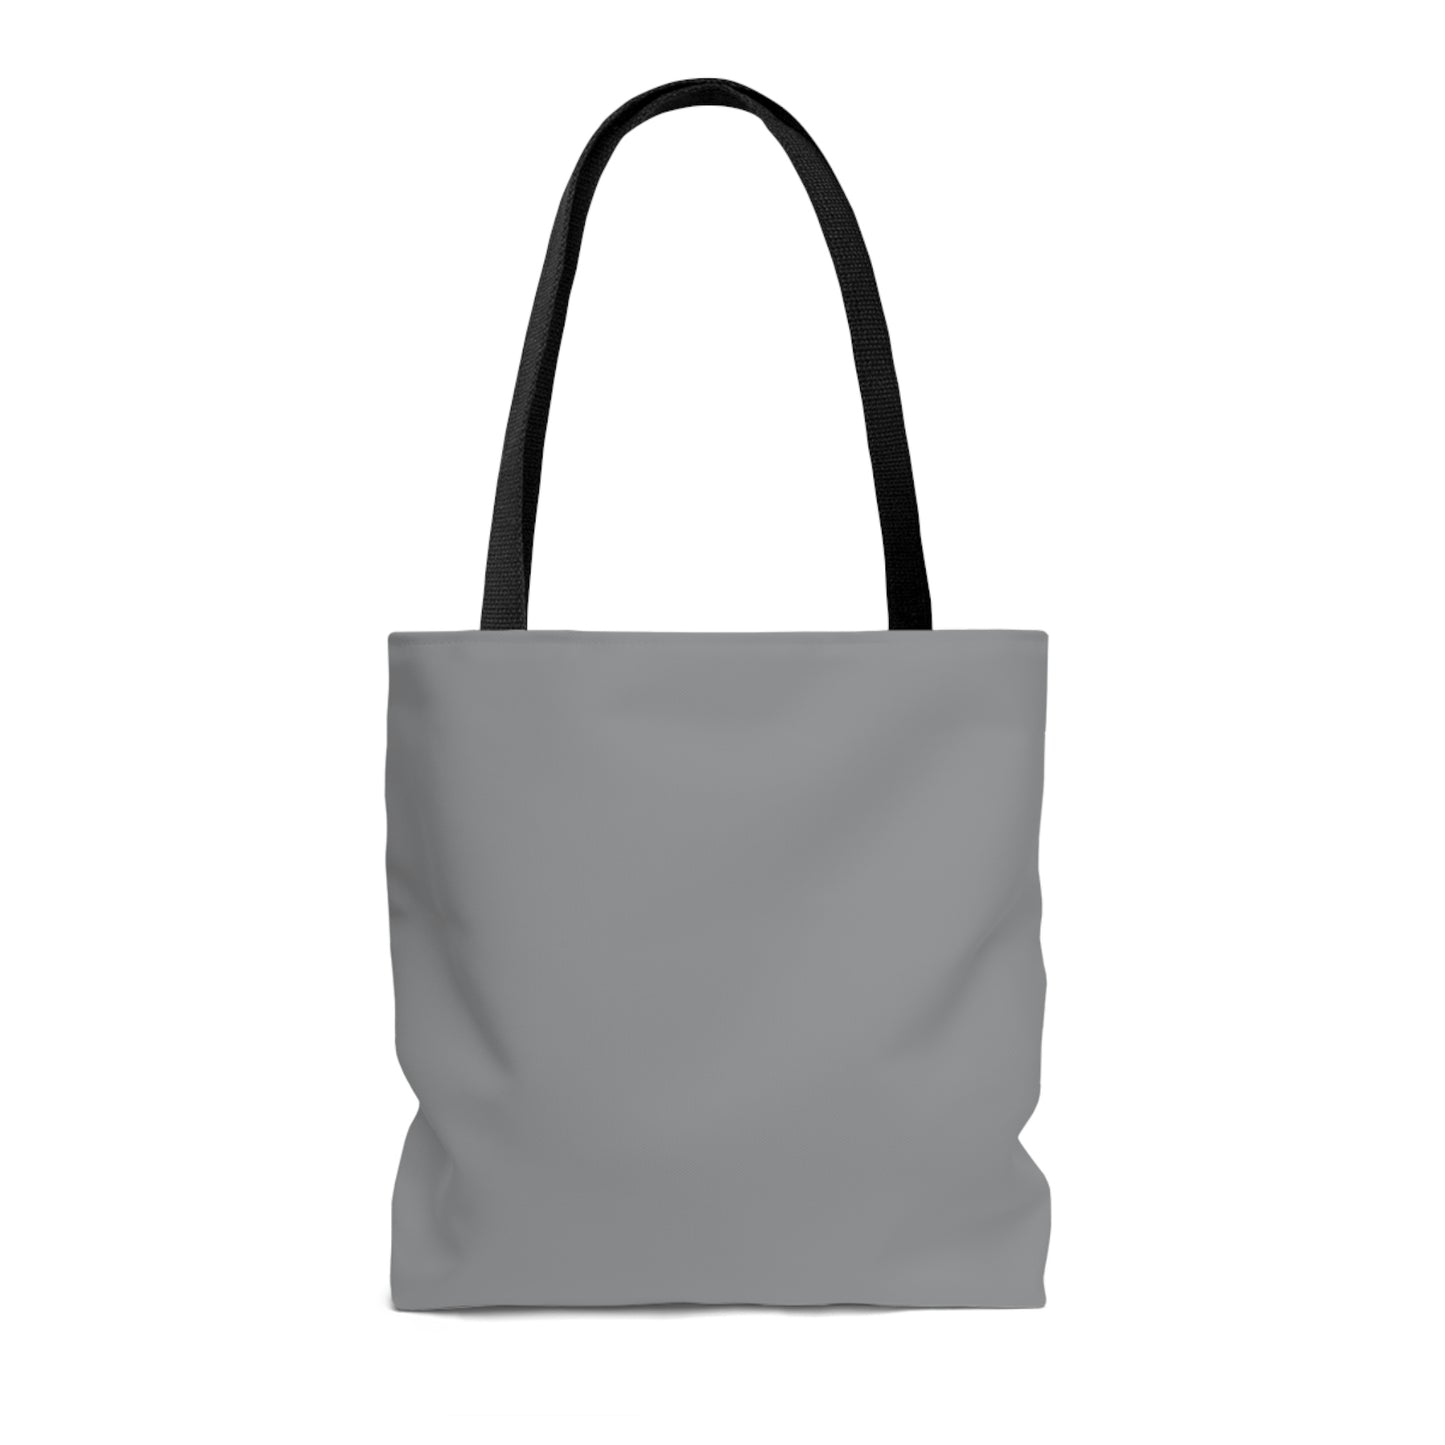 Blessed To Be An Answered Prayer Tote Bag